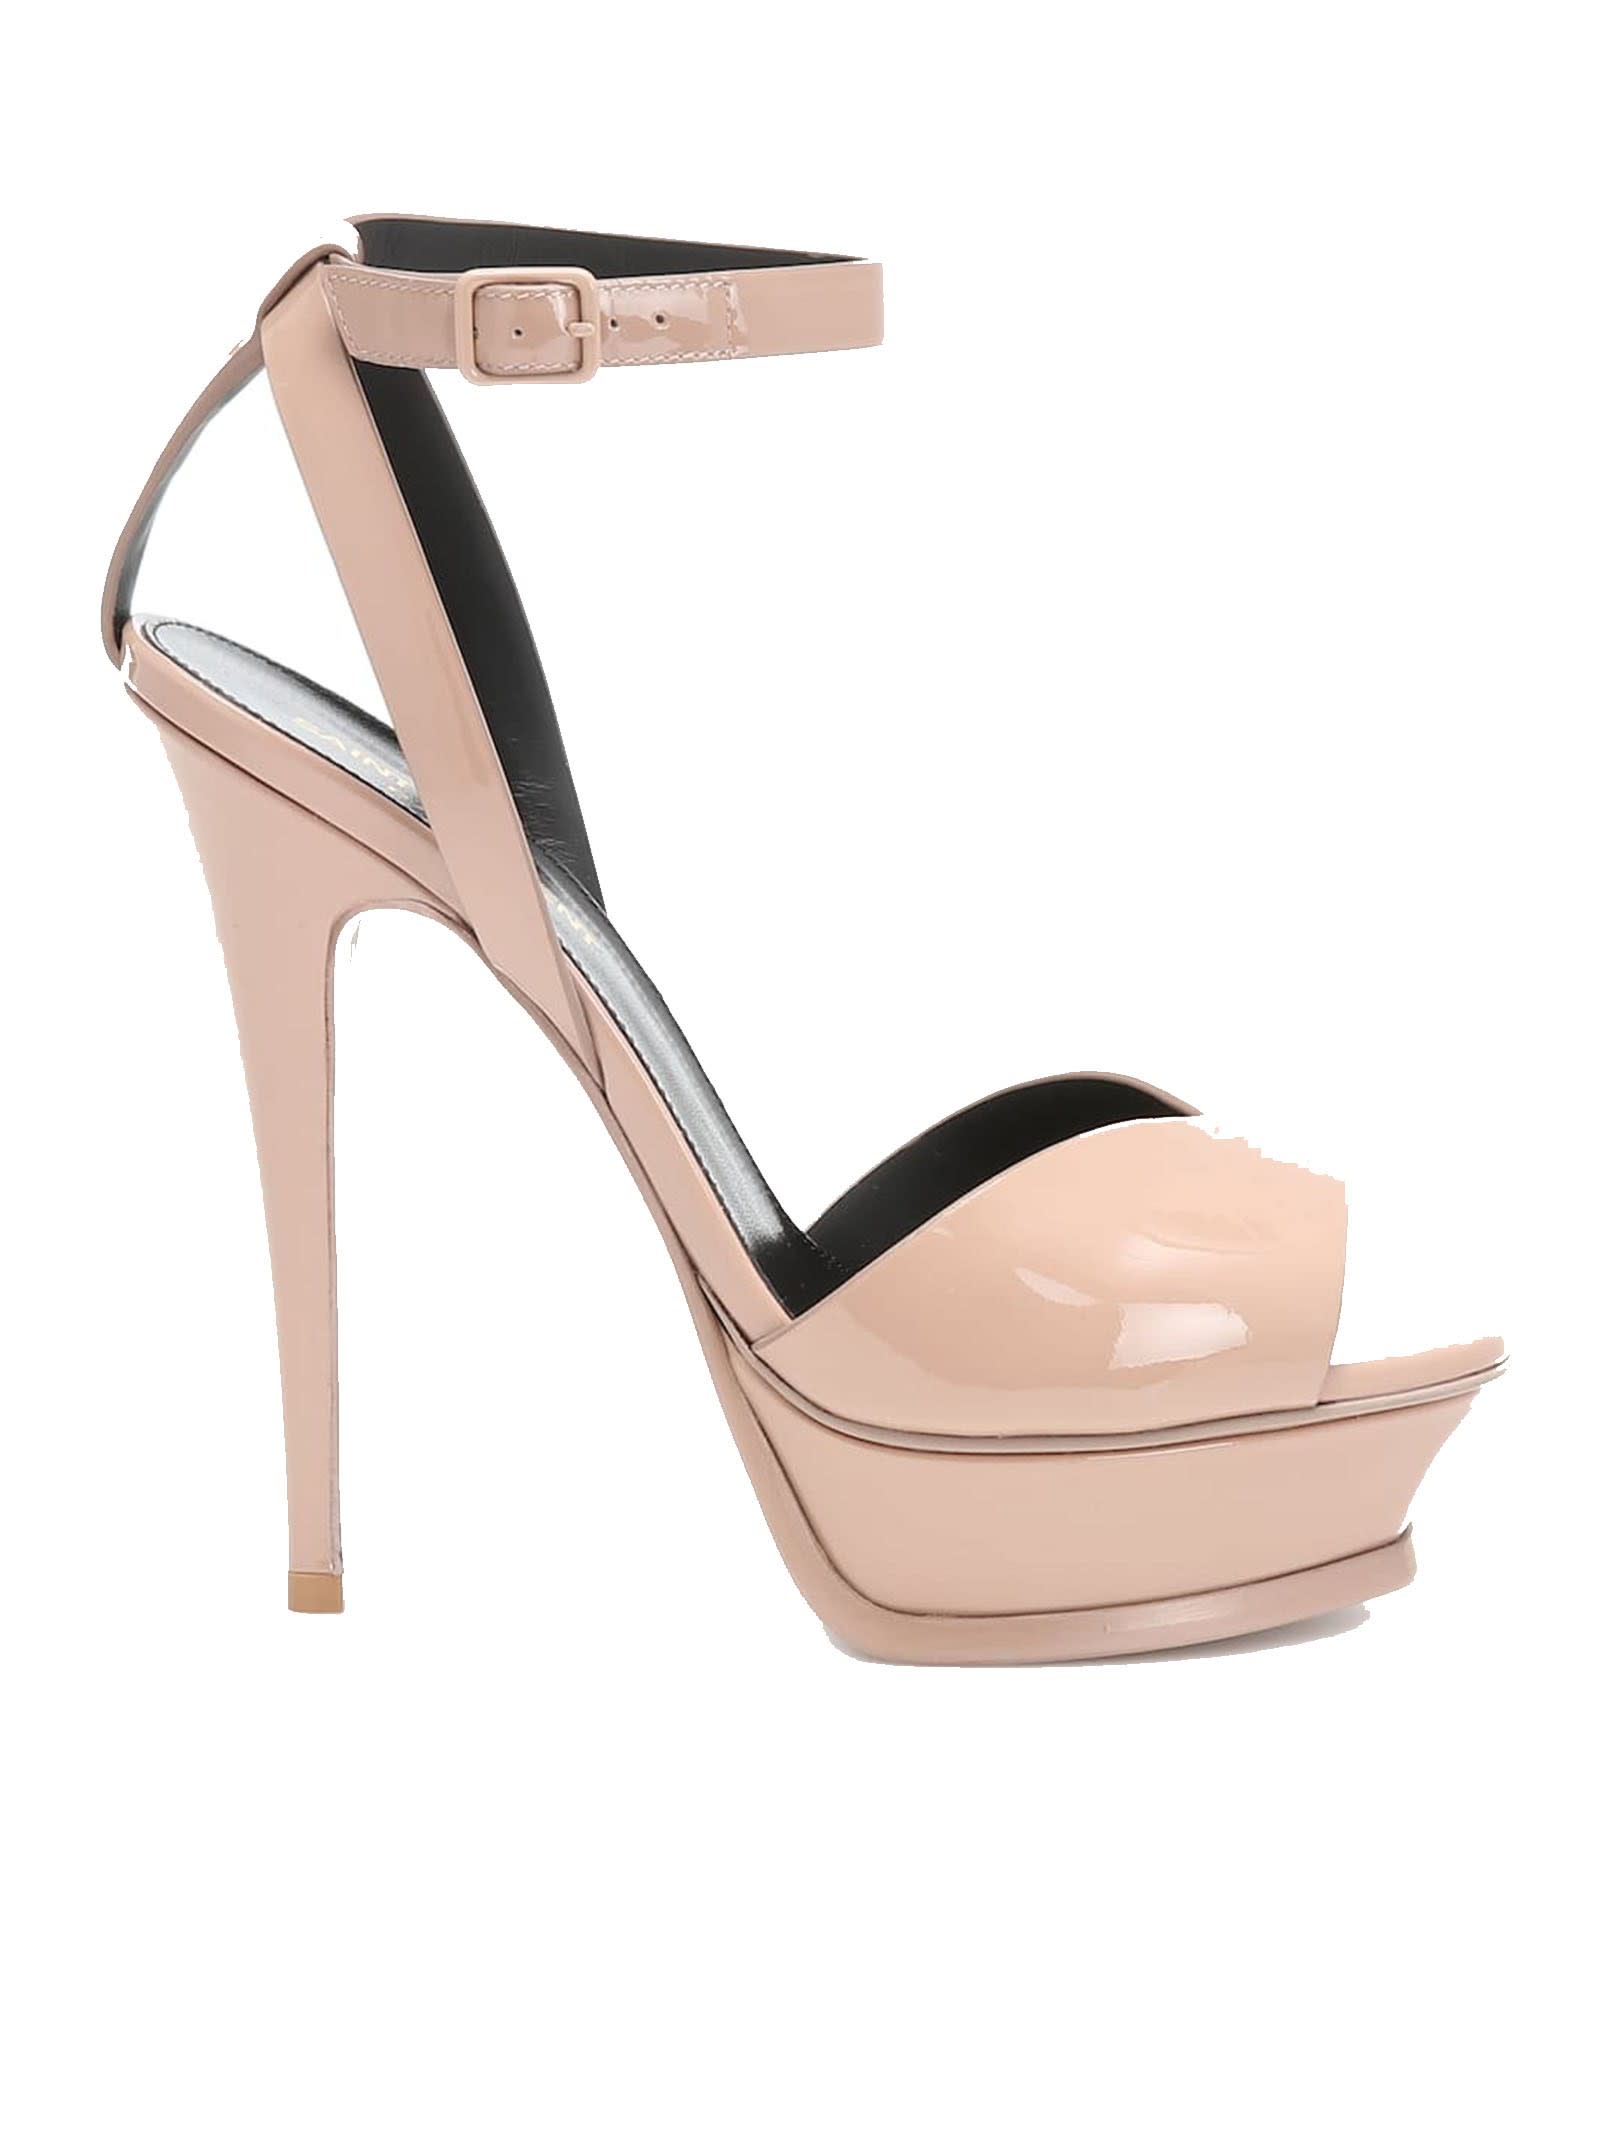 Saint Laurent Tribute Lips Sandals In Nude Patent Leather